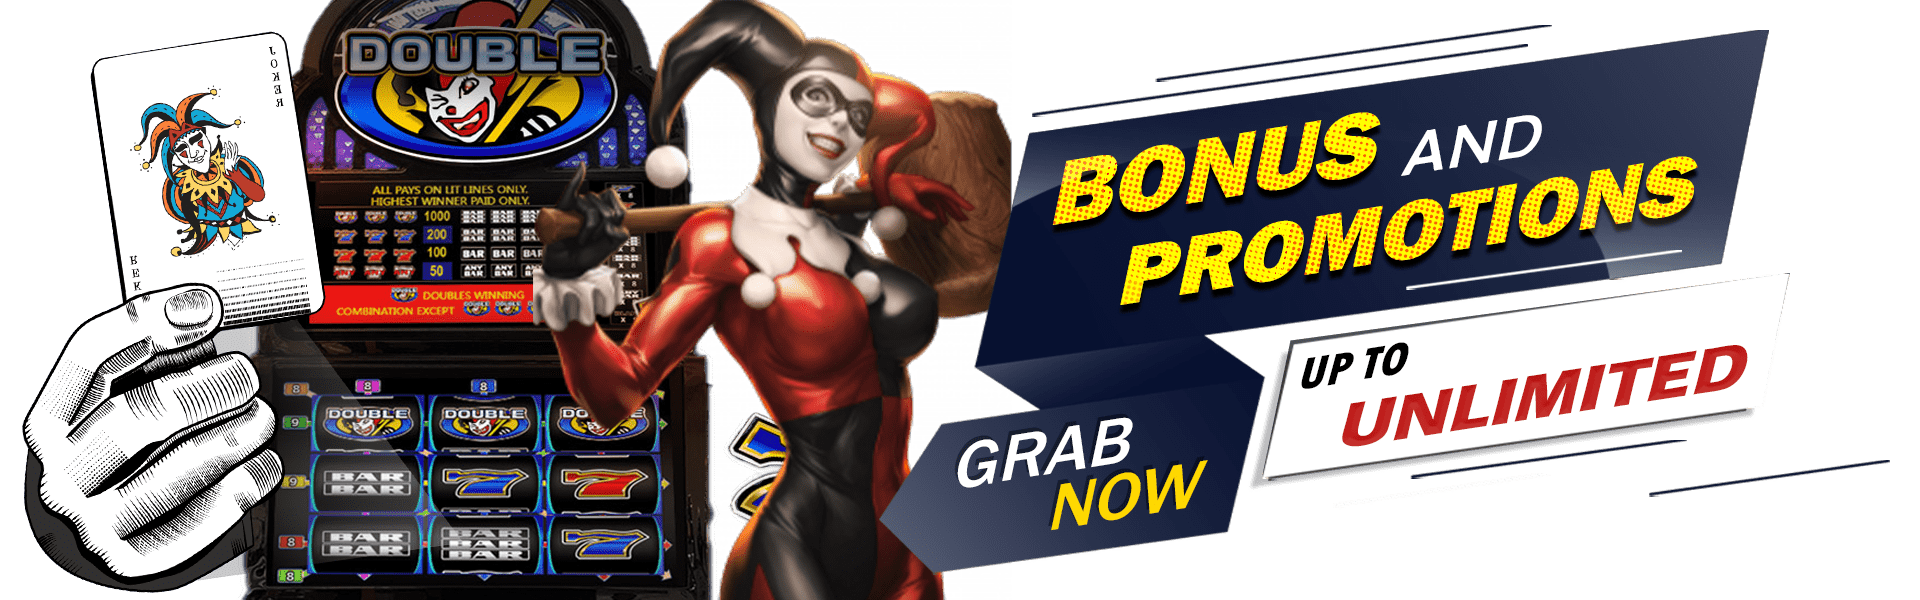 ultimate gaming bonus and promotion banner